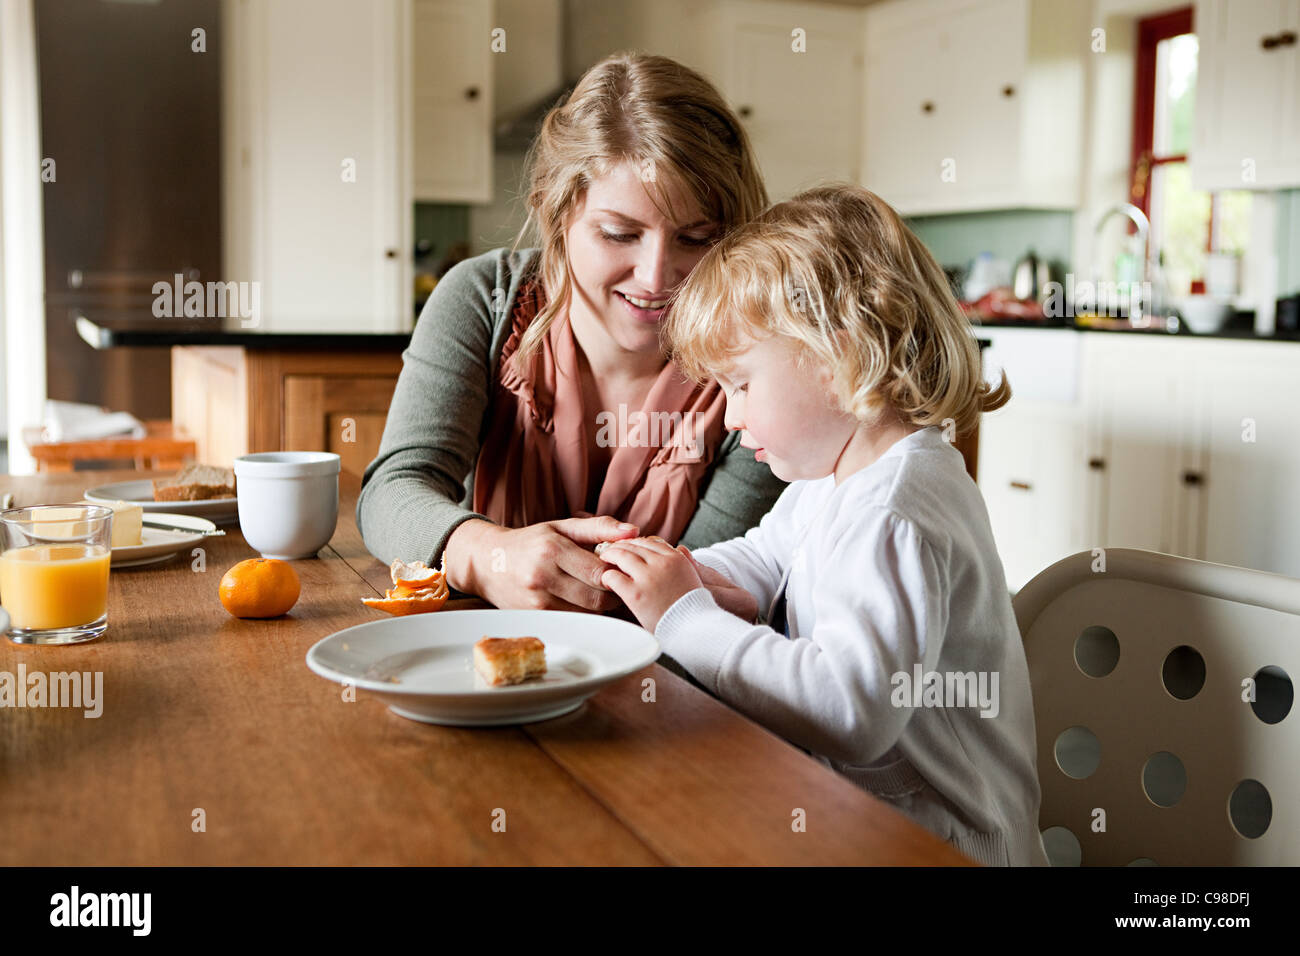 Mother and daughter having breakfast Stock Photo